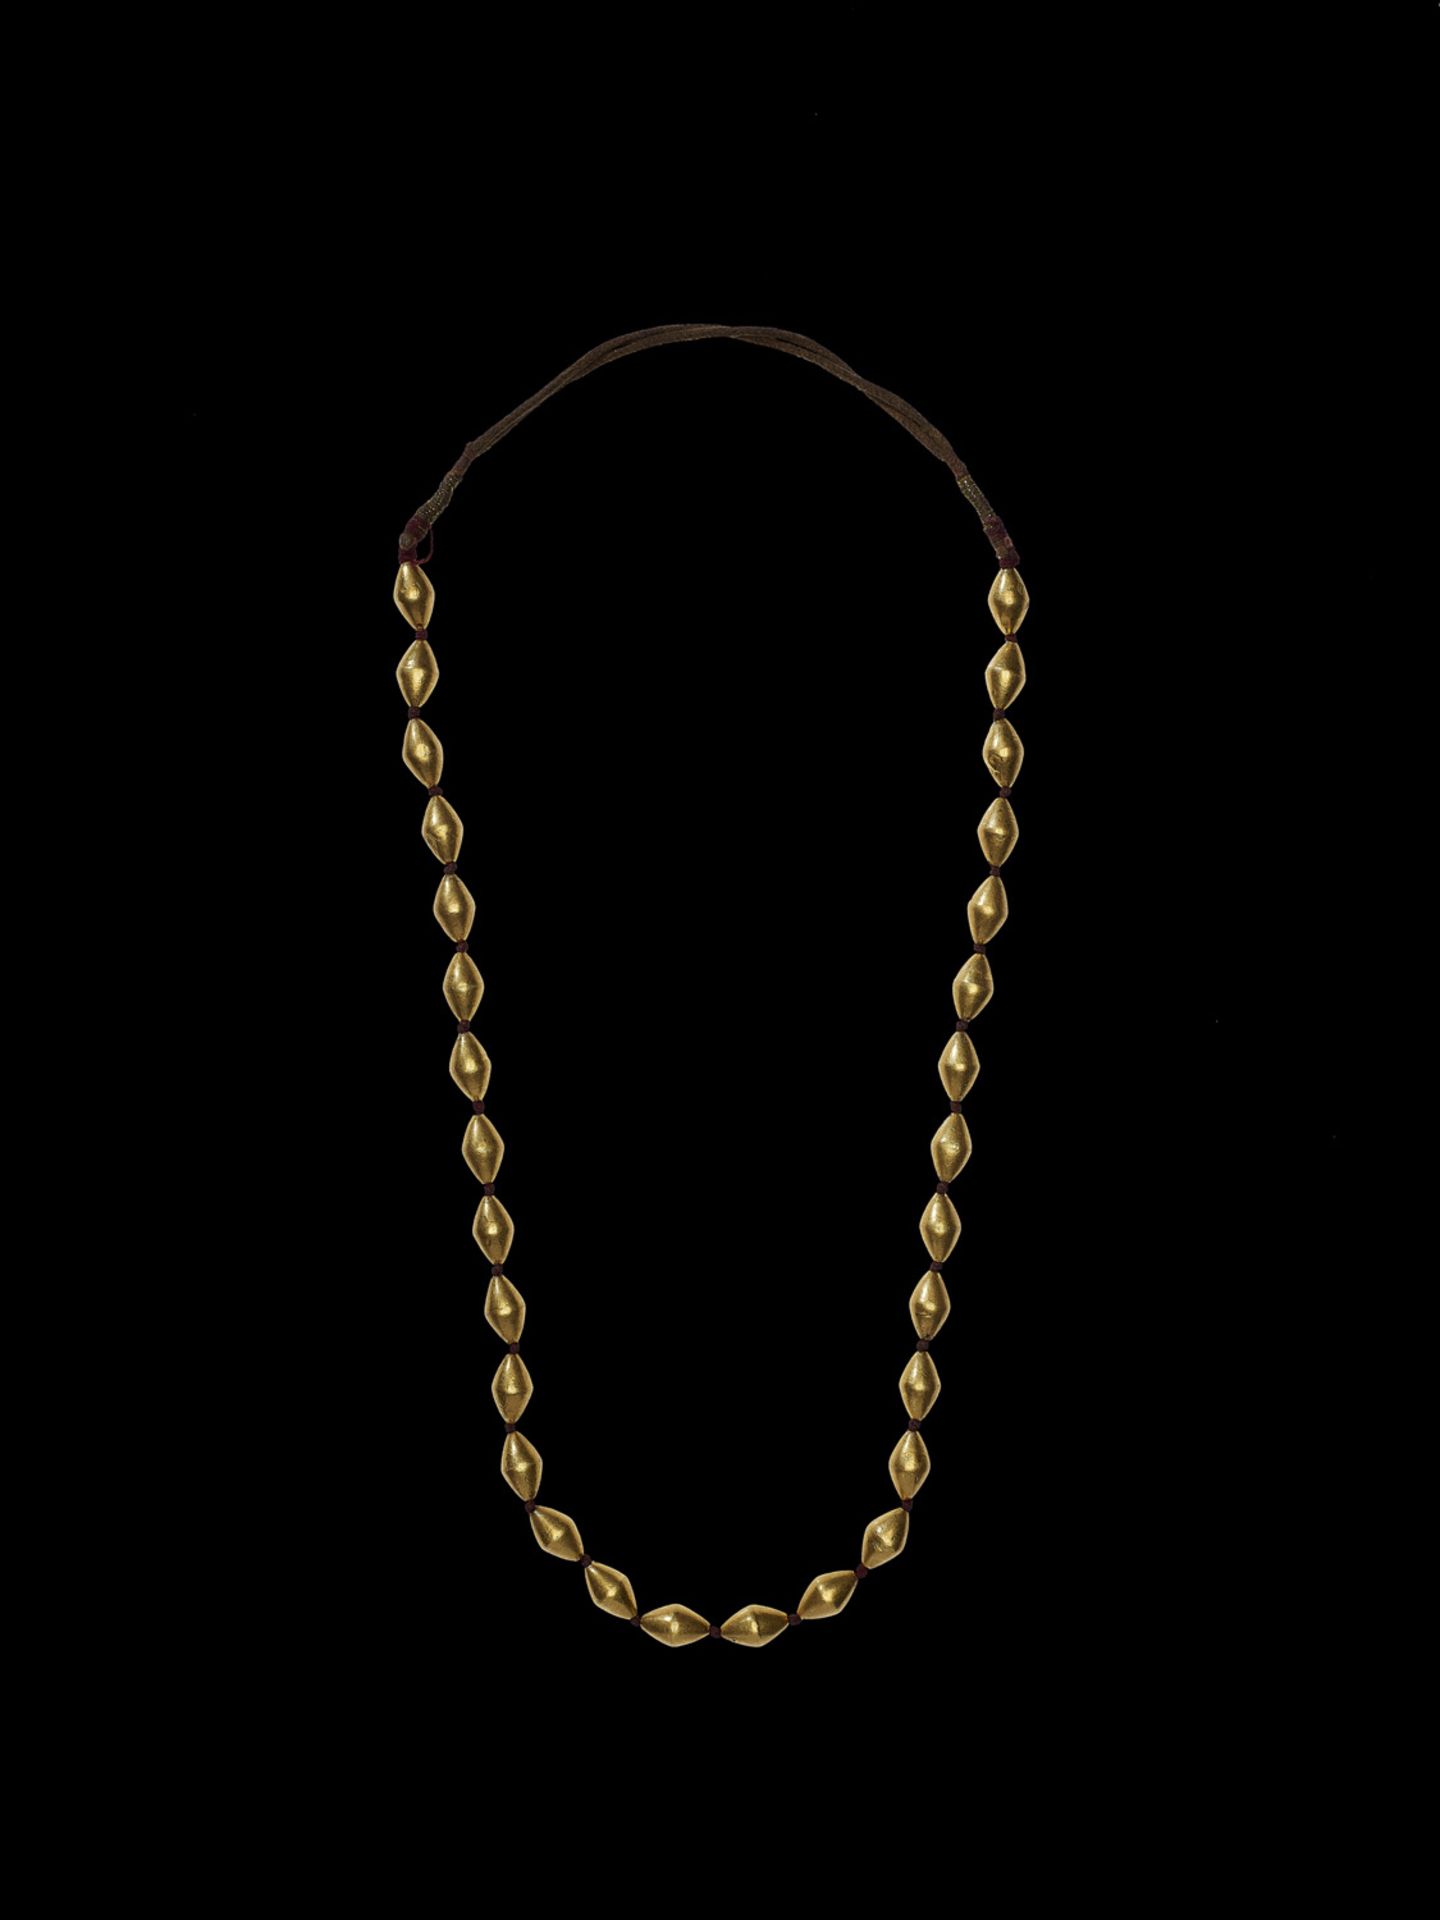 A BURMESE GOLD NECKLACE WITH 30 BEADS